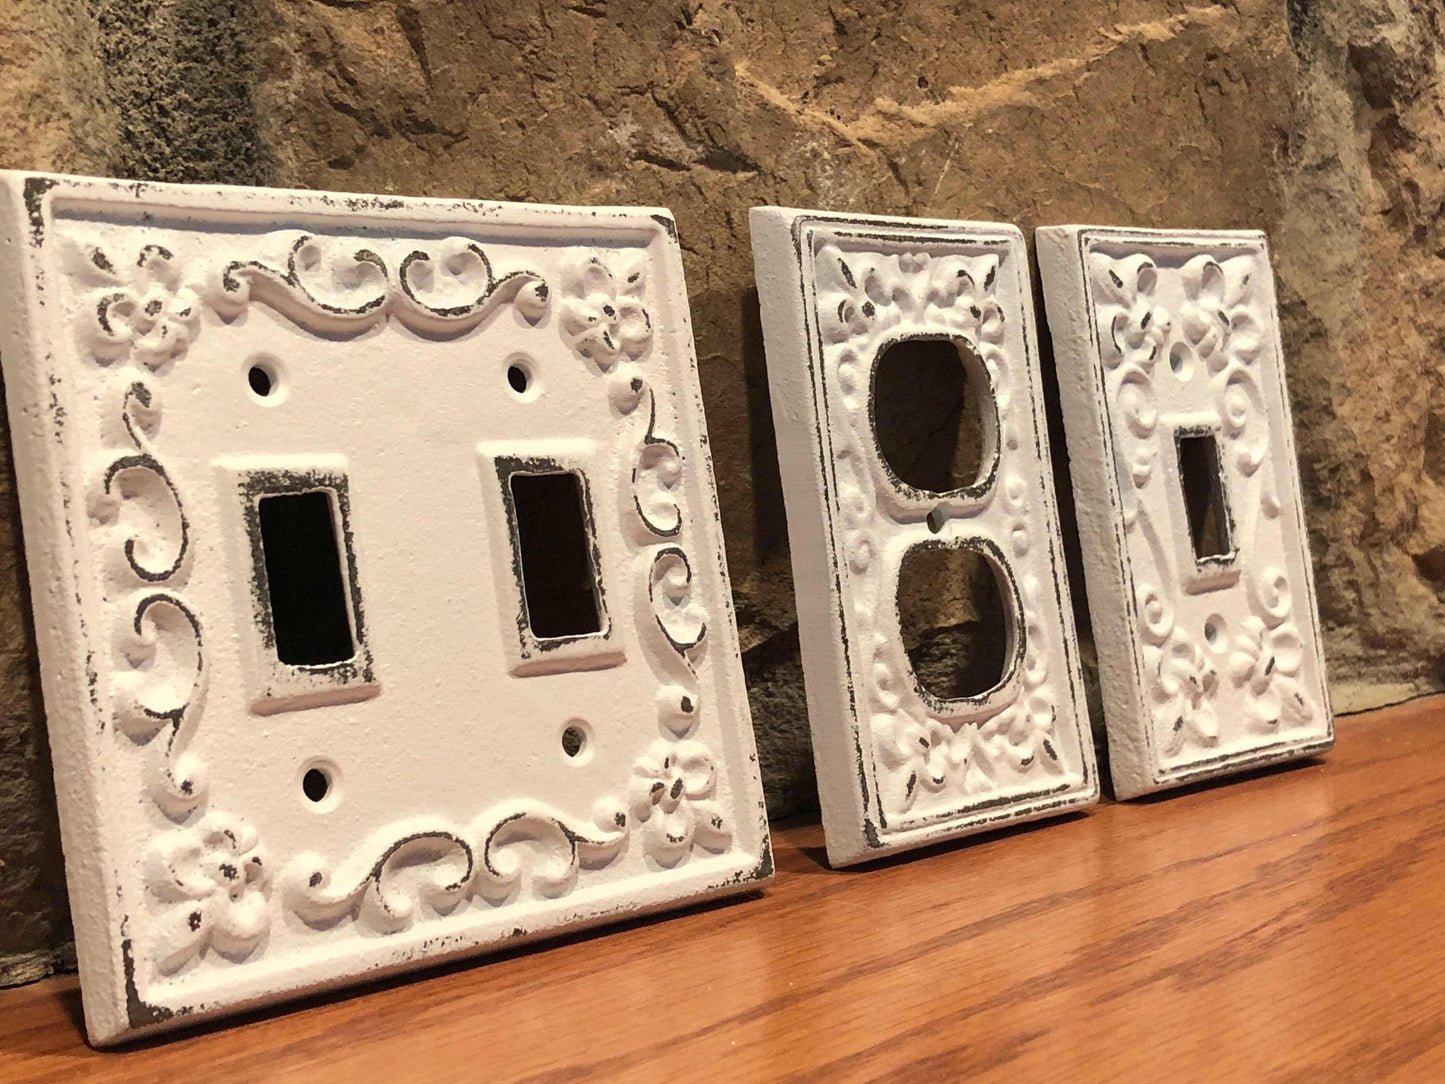 Light Switch Cover/Double light switch/cast iron switch/Light Switch Plate/Decorative wall Cover/ Outlet Cover/ Shabby Chic/ Metal Plate